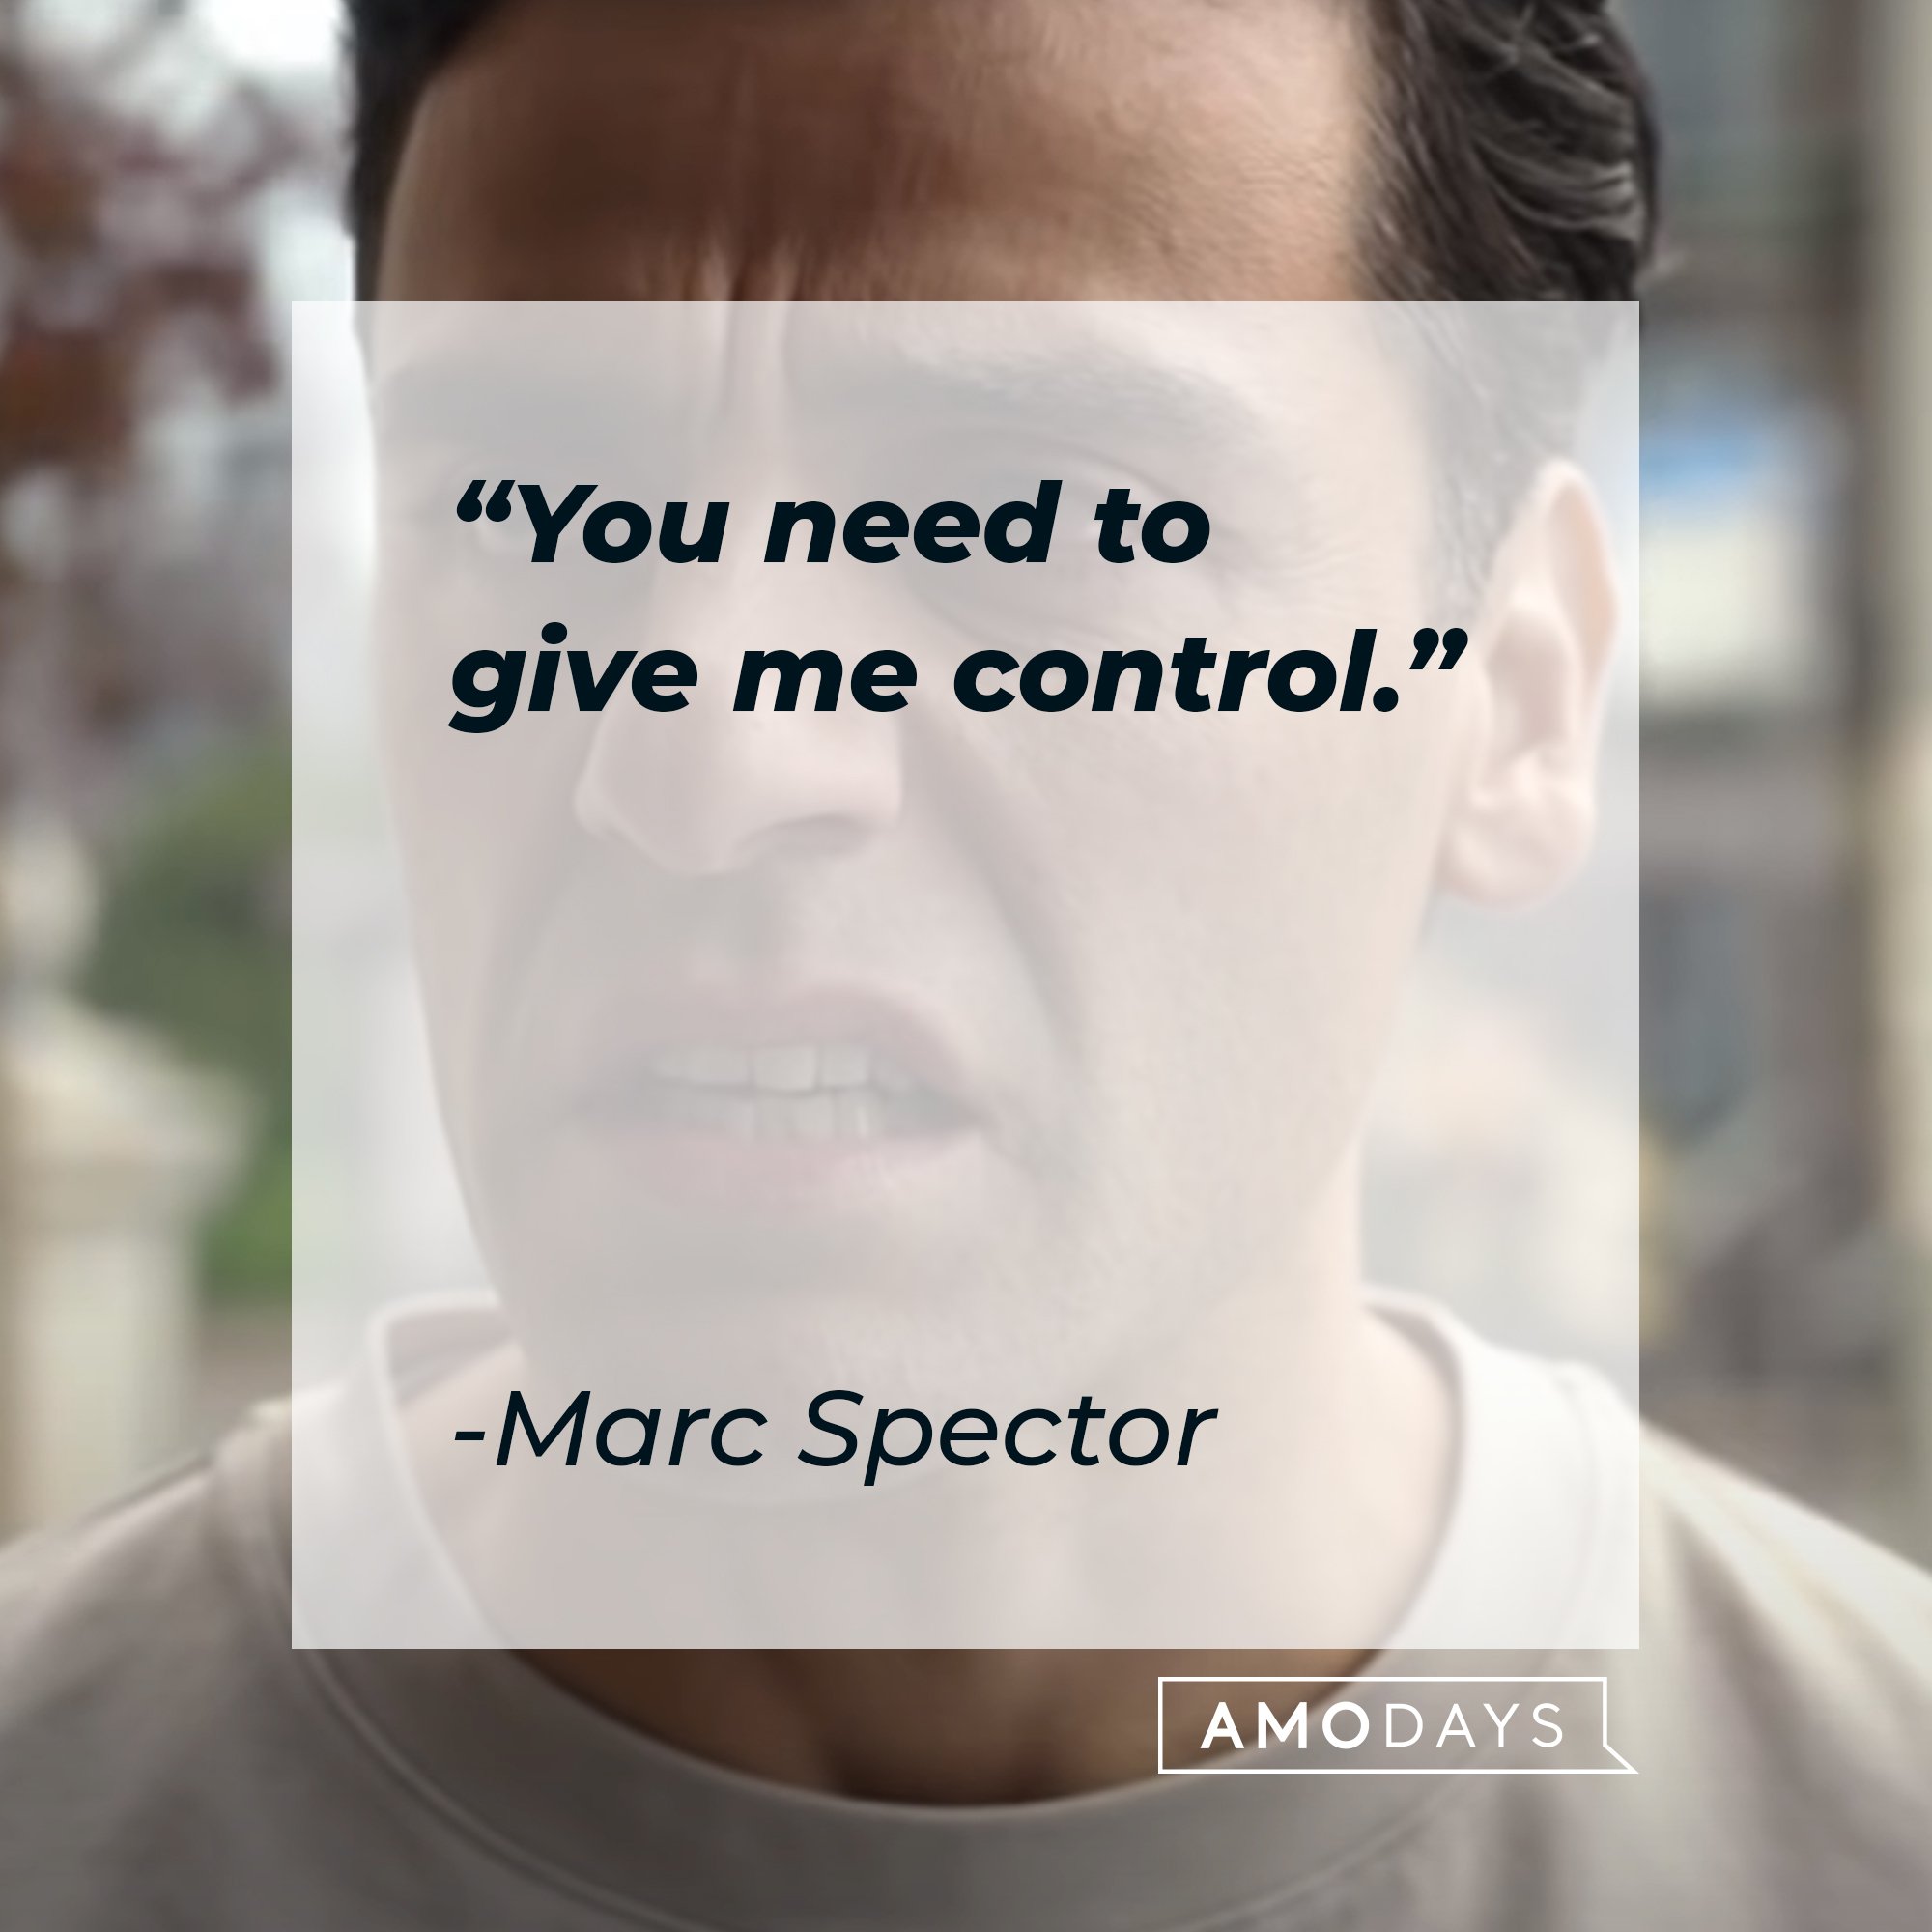 Marc Spector’s quote: "You need to give me control." | Image: AmoDays